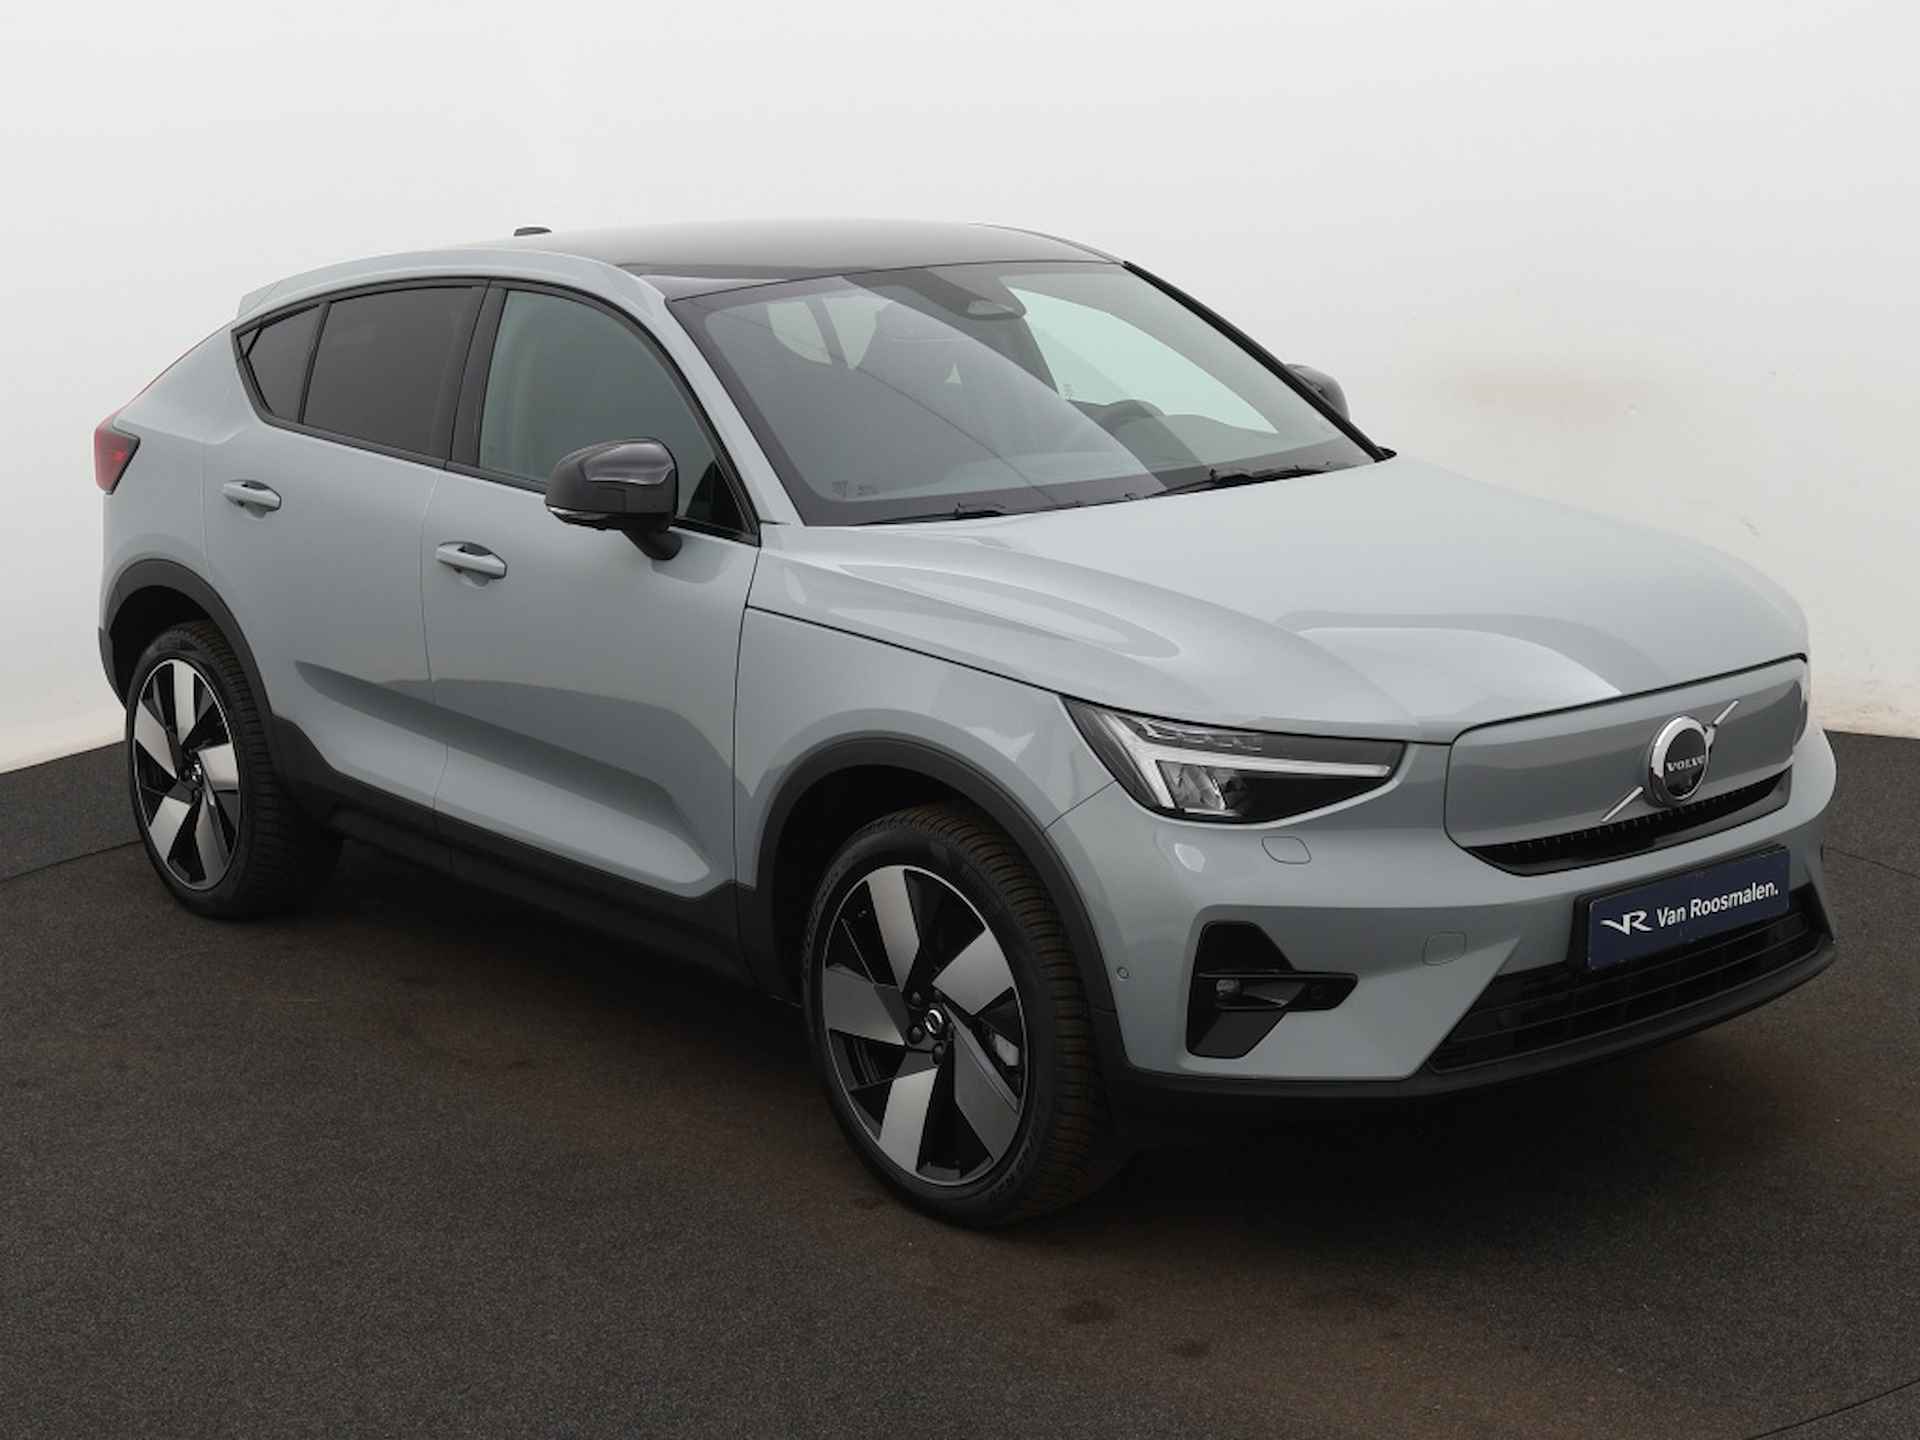 Volvo C40 Extended Ult 82 kWh - 7/43